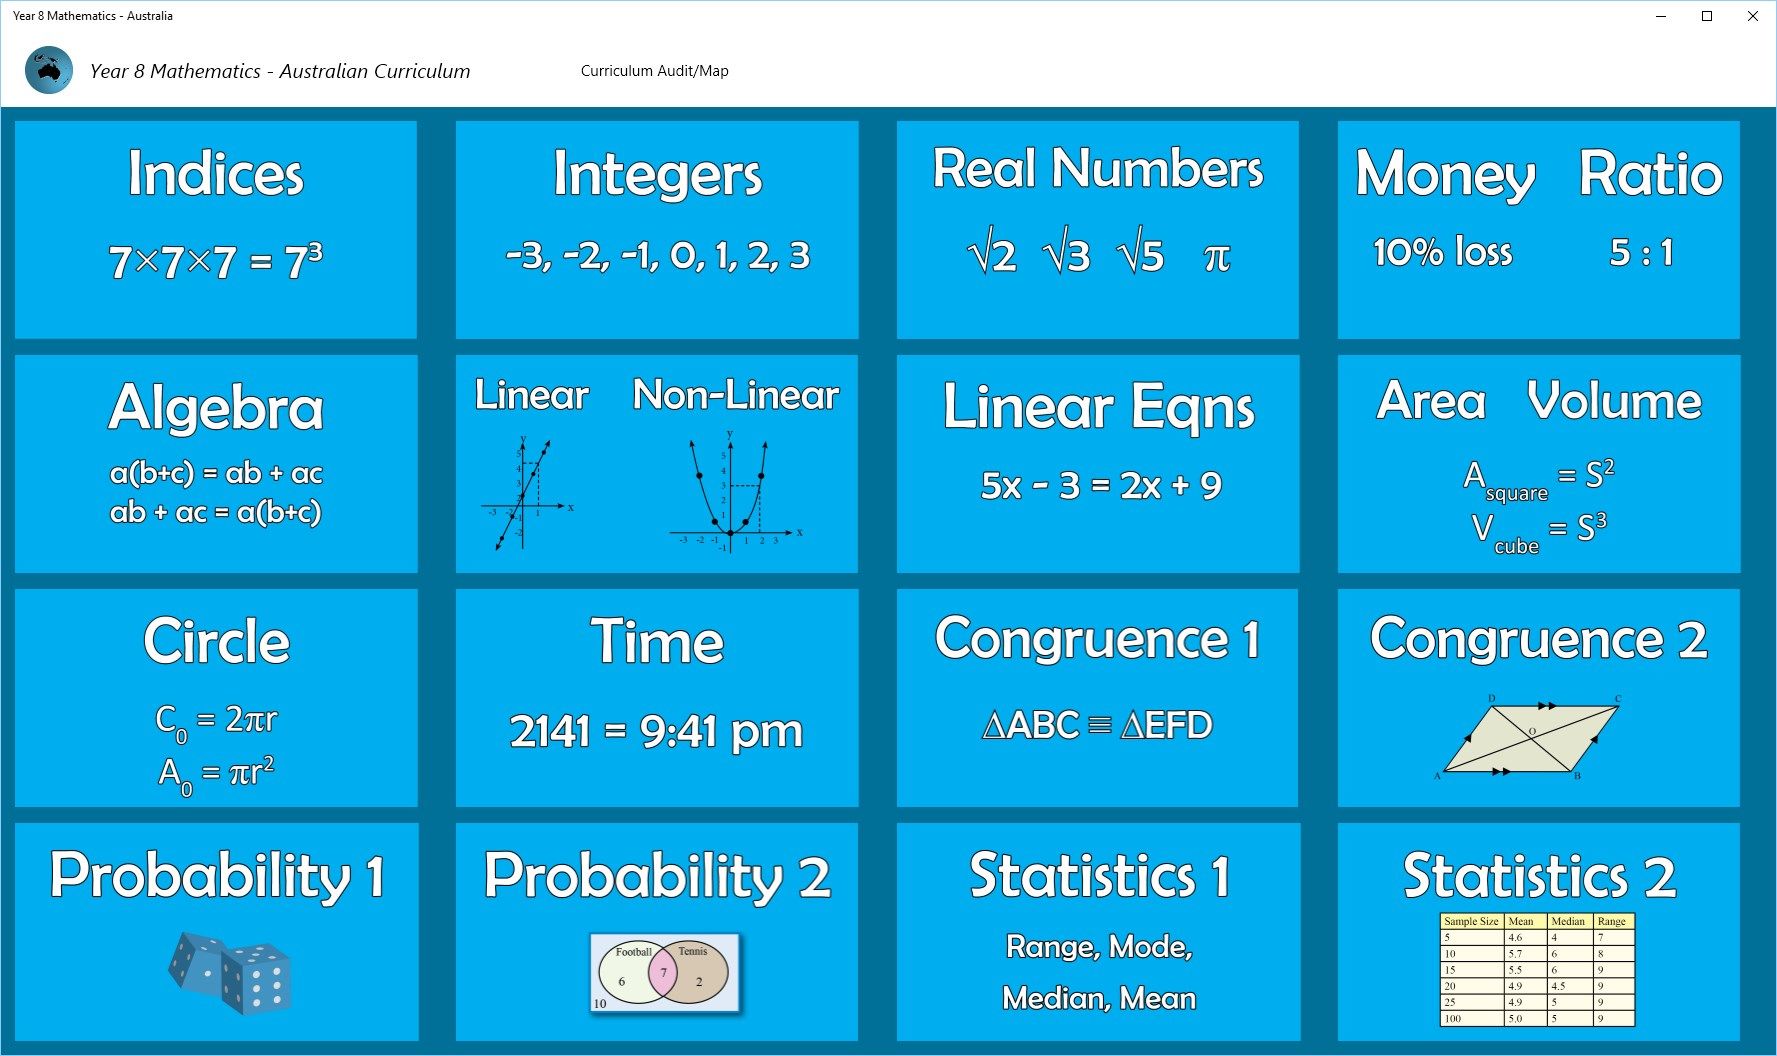 The main page of the app showing the Year 8 mathematics curriculum divided into two and three week modules